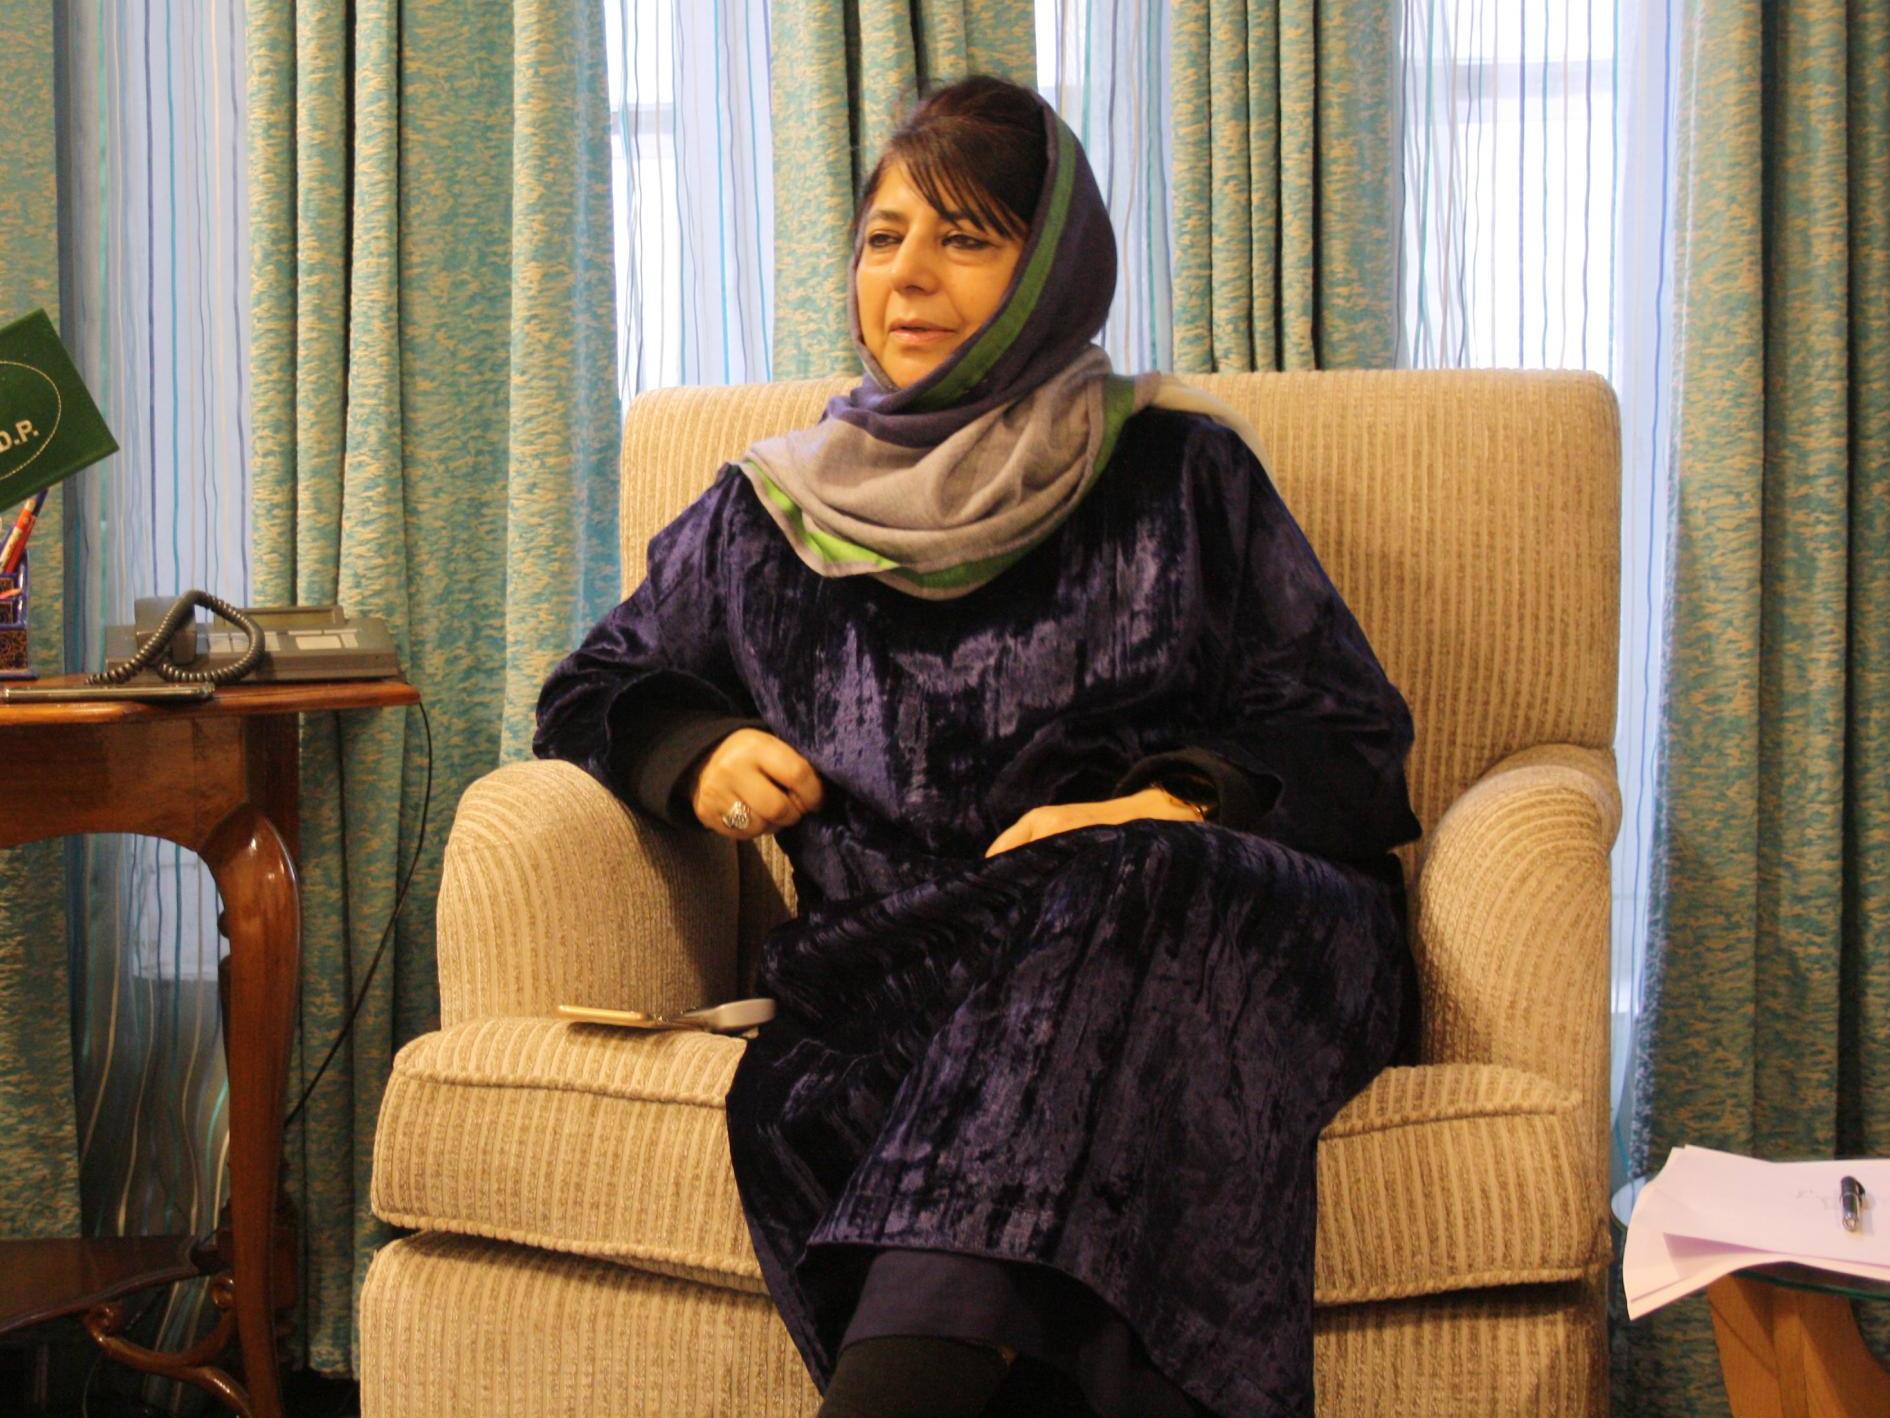 Mehbooba Mufti is being detained under the Public Safety Act